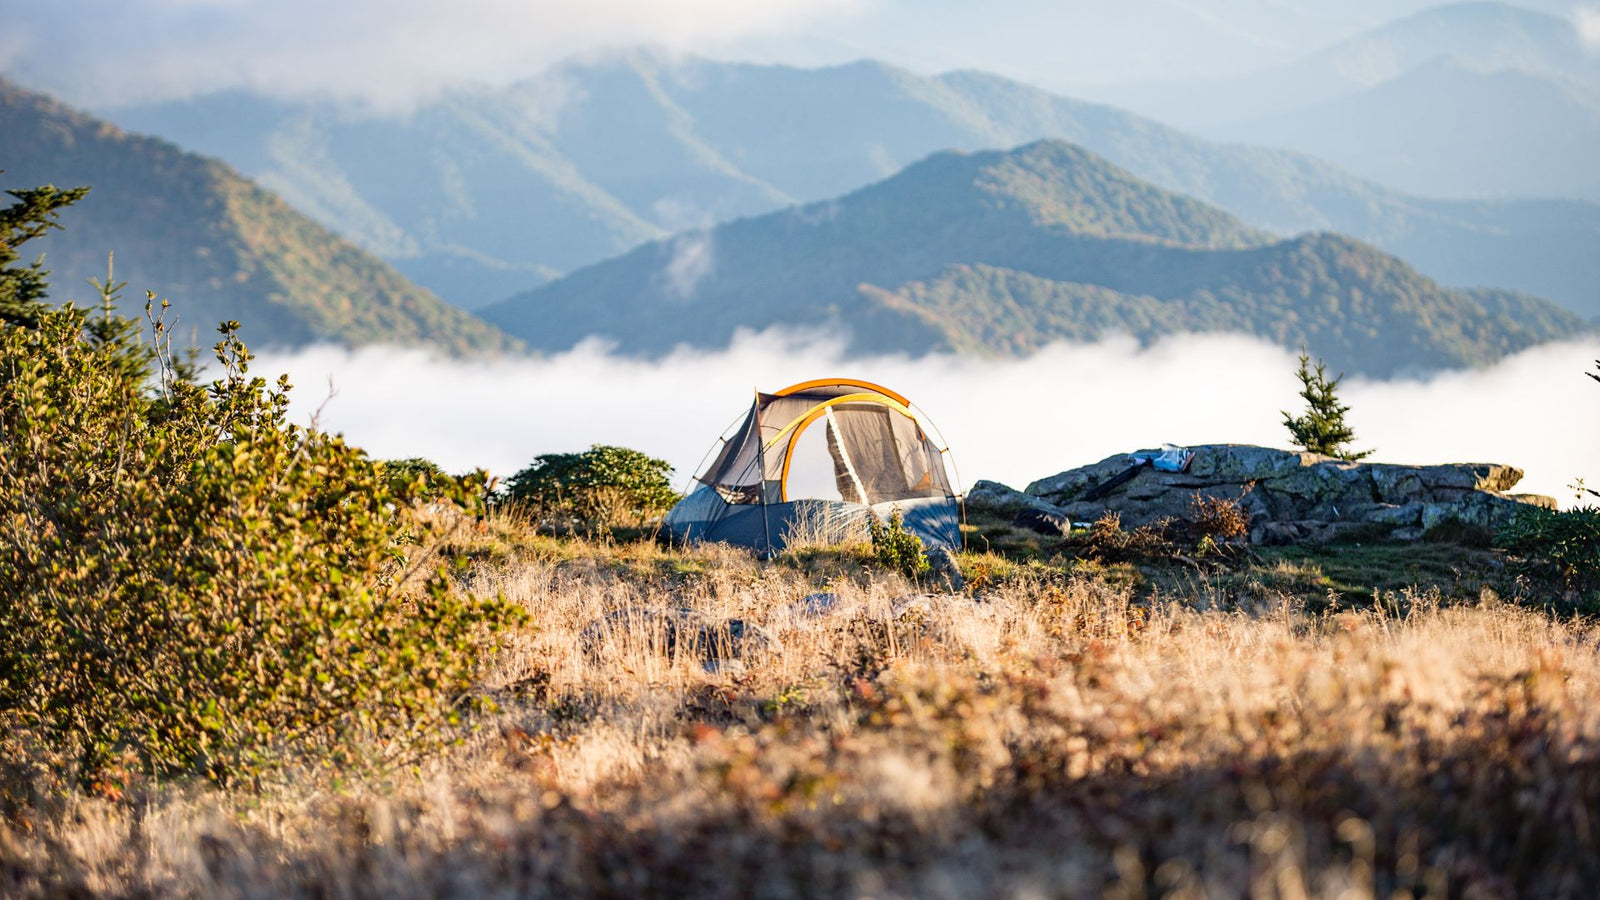 How Can Rocksolar's LiFePO4 Batteries Transform Your Fall Camping Trip?